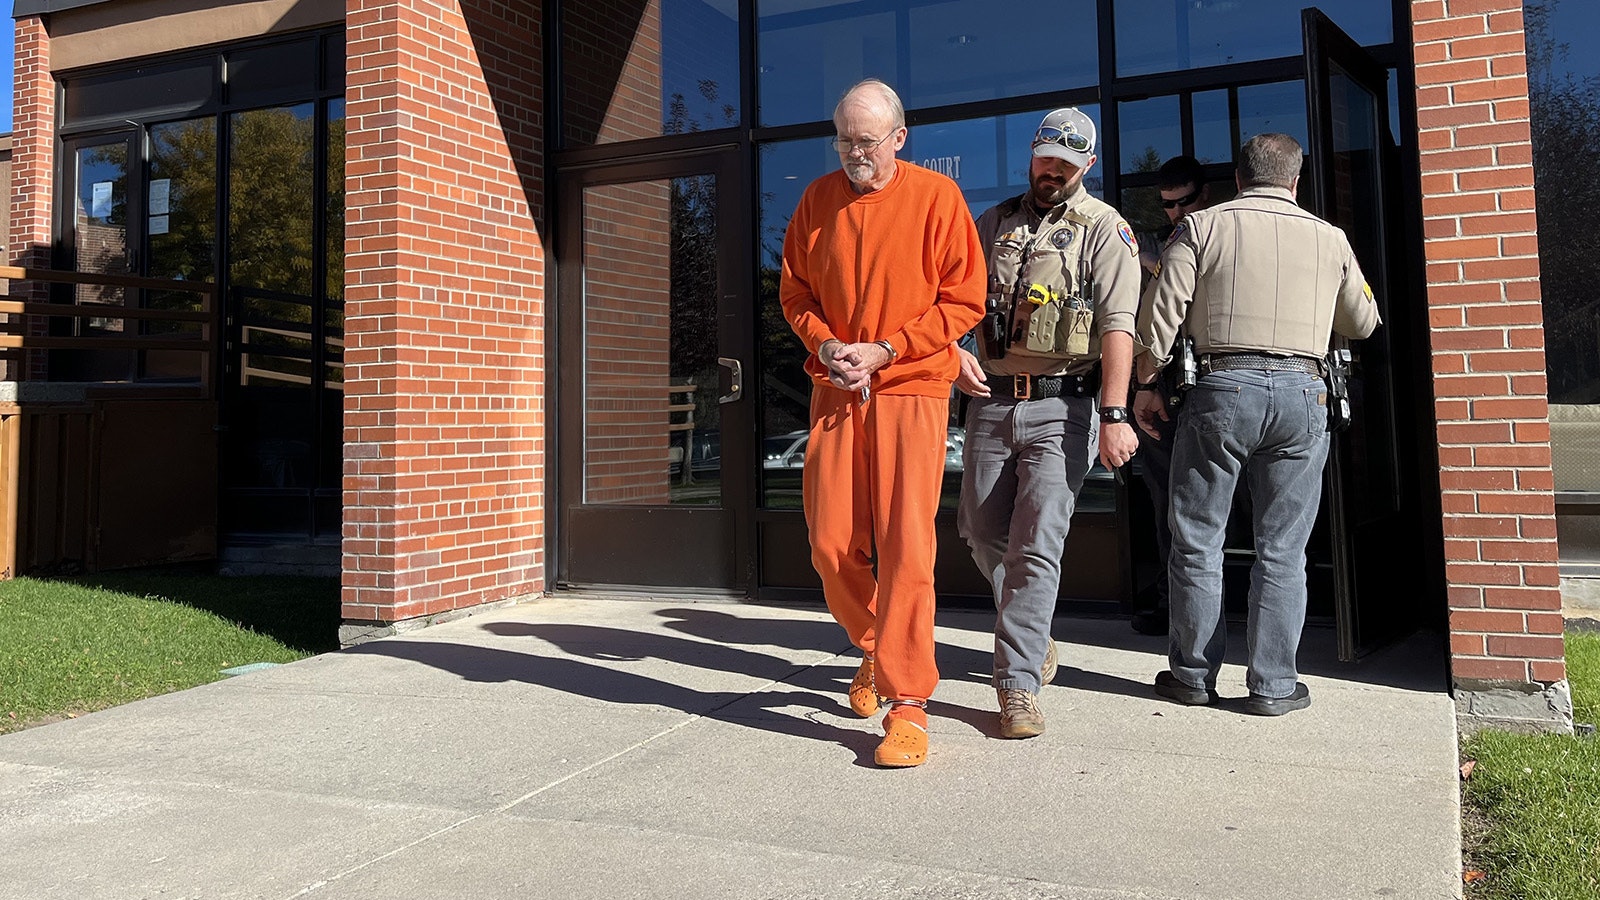 Donald Detimore, 72, of Lander, Wyoming, is led out of the Fremont County Courthouse on Thursday after he was sentenced to 40-50 years in prison for sexually abusing a 7-year-old girl.